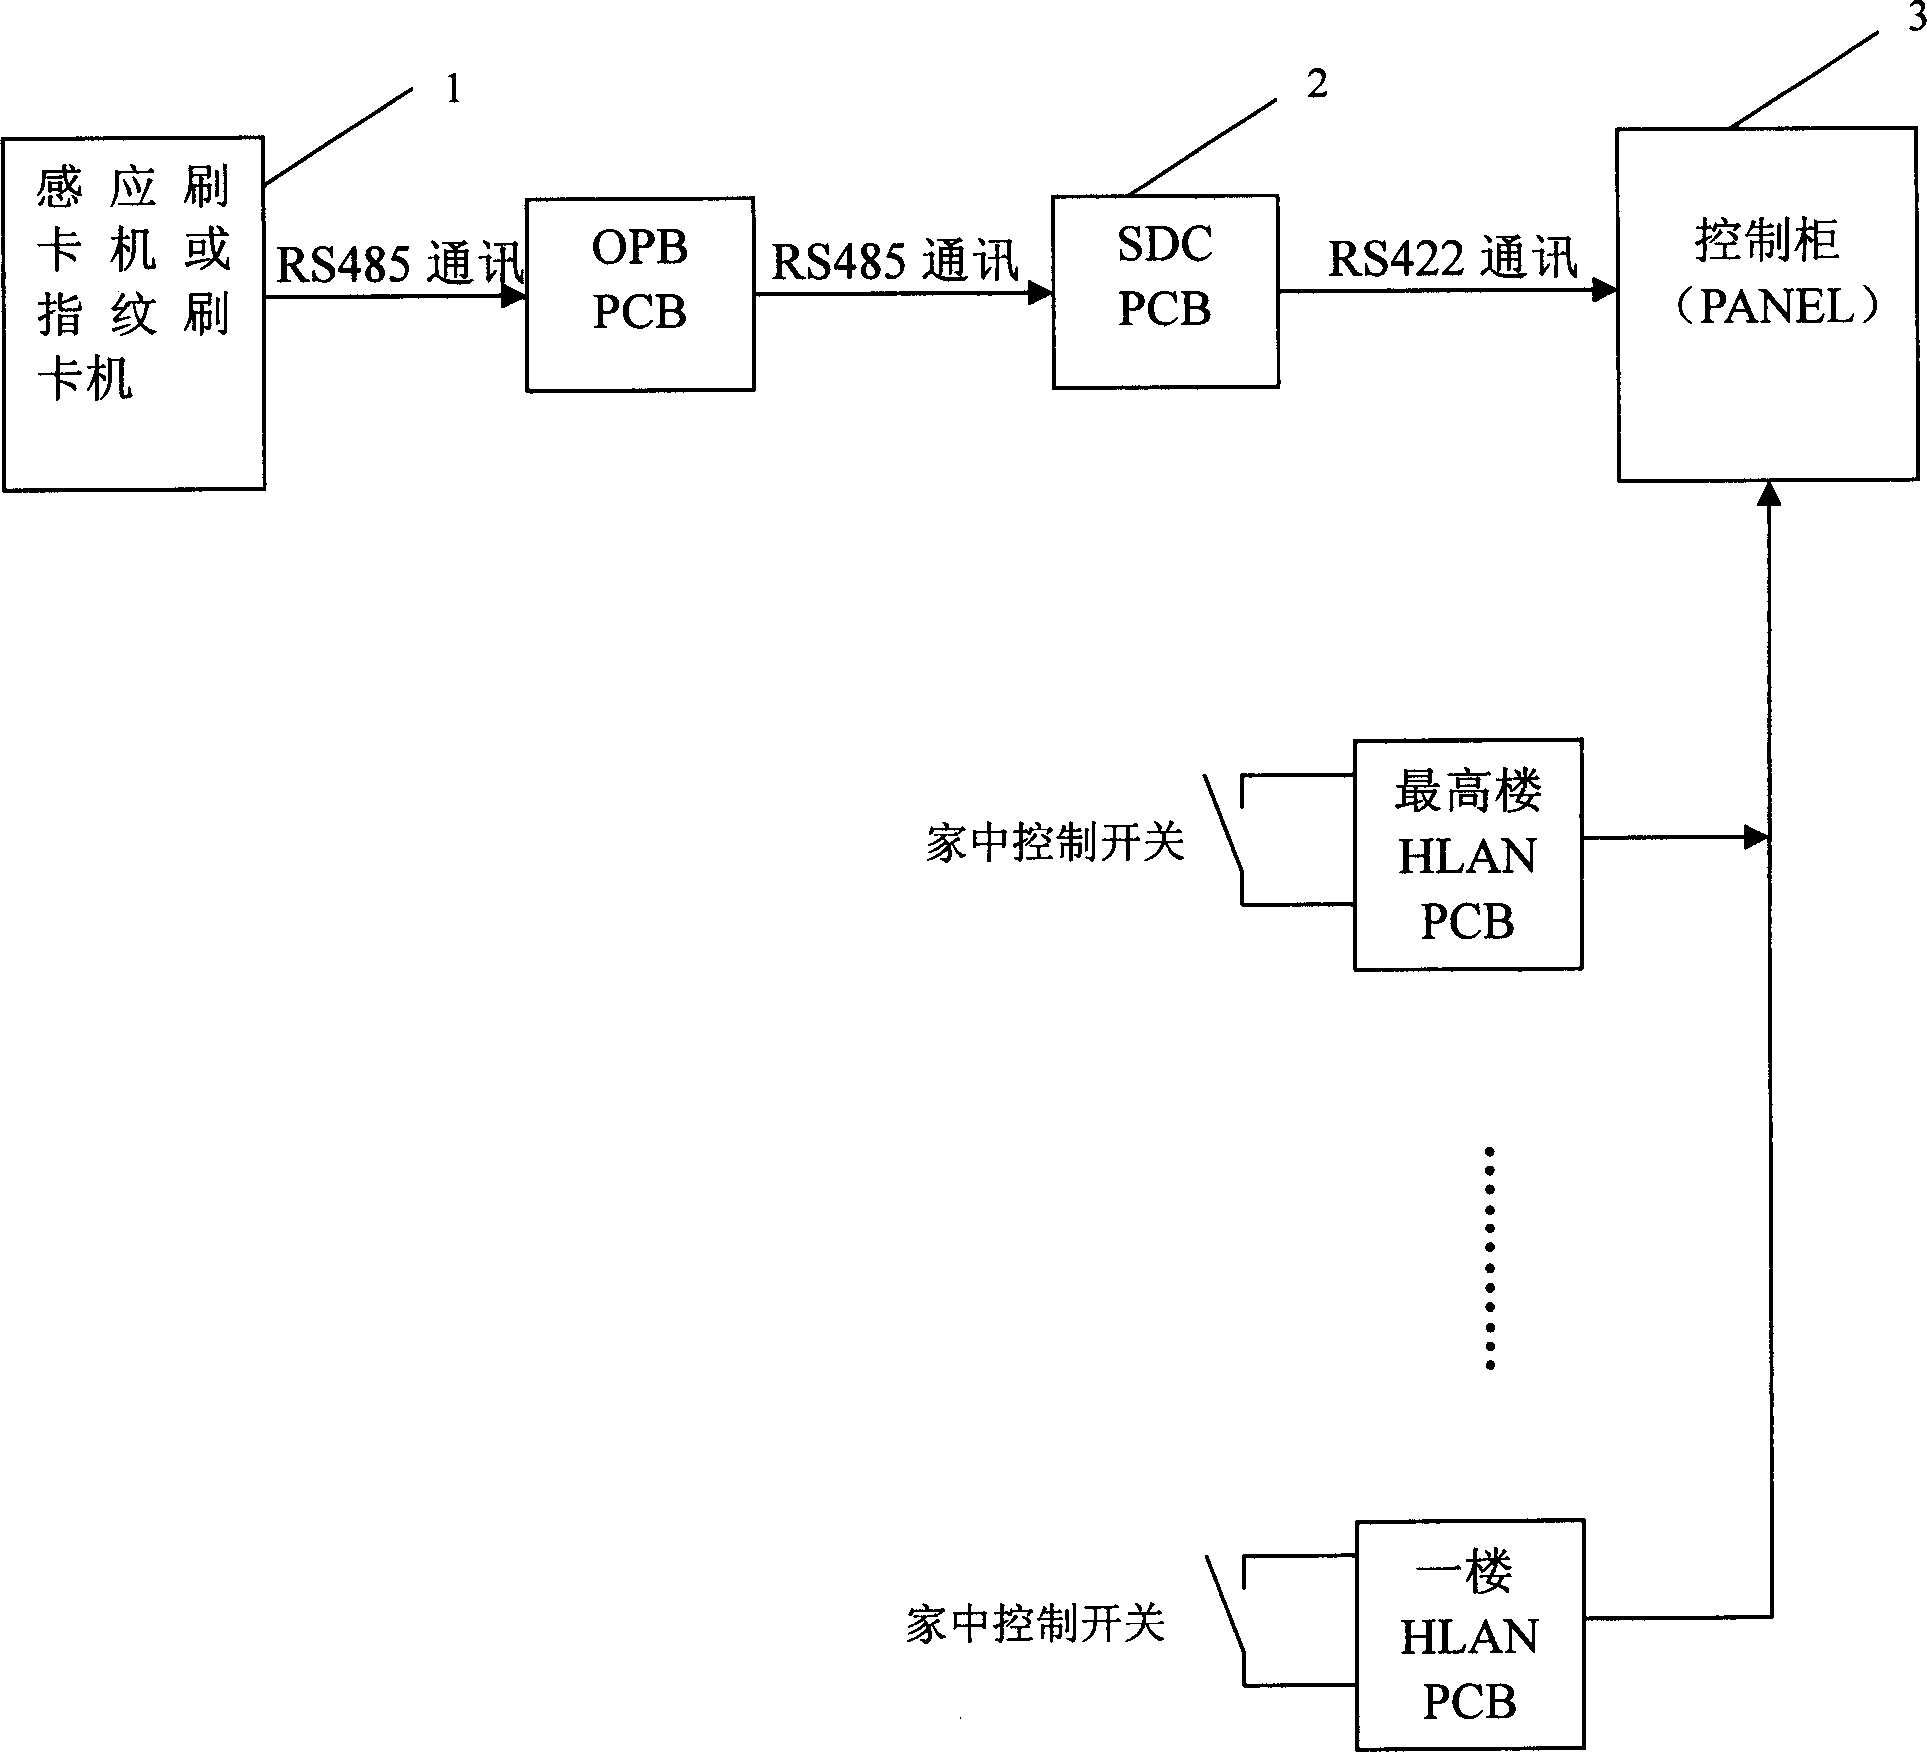 Elevator card-reading coutrol system